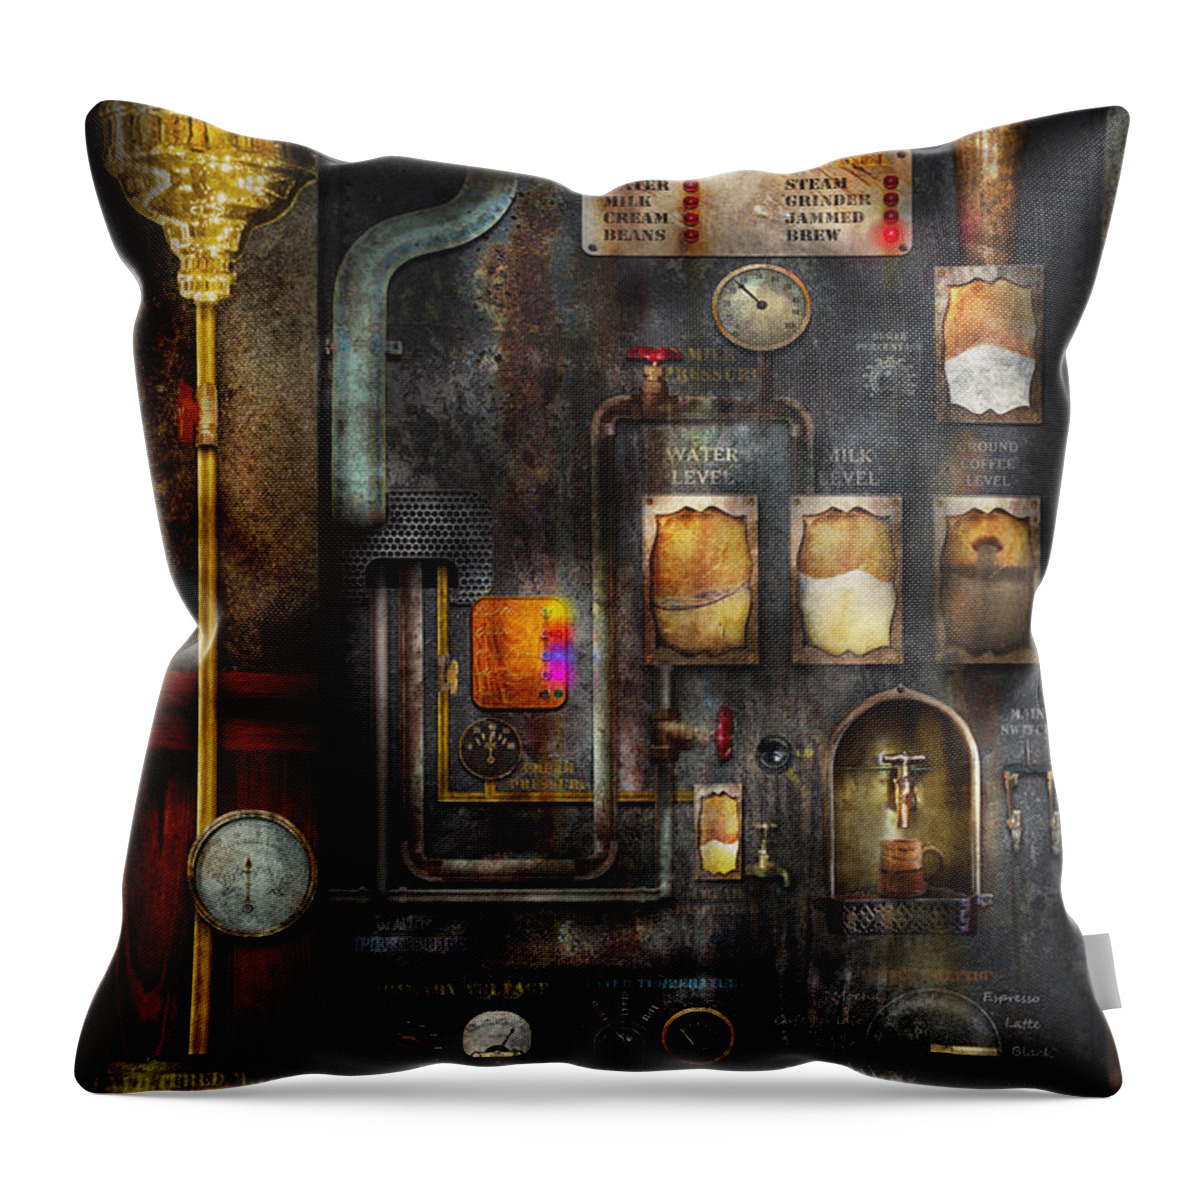 Steampunk Throw Pillow featuring the digital art Steampunk - All that for a cup of coffee by Mike Savad